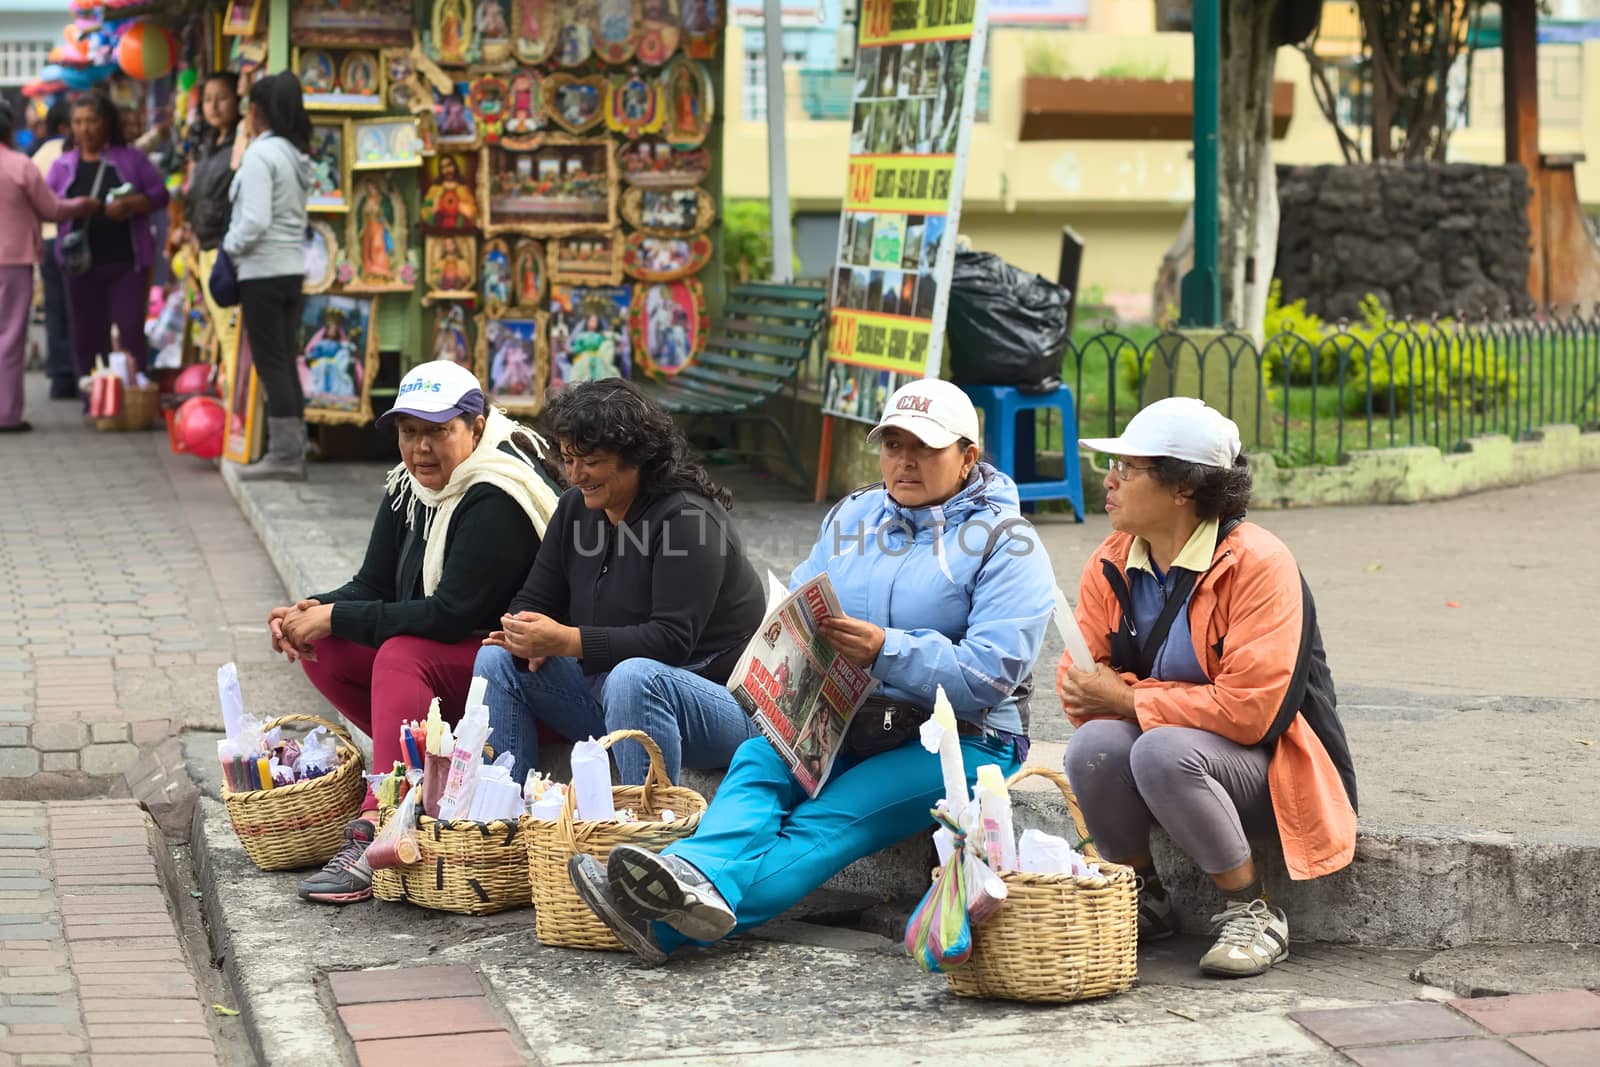 Selling Candles Outside the Cathedral of Banos, Ecuador by ildi